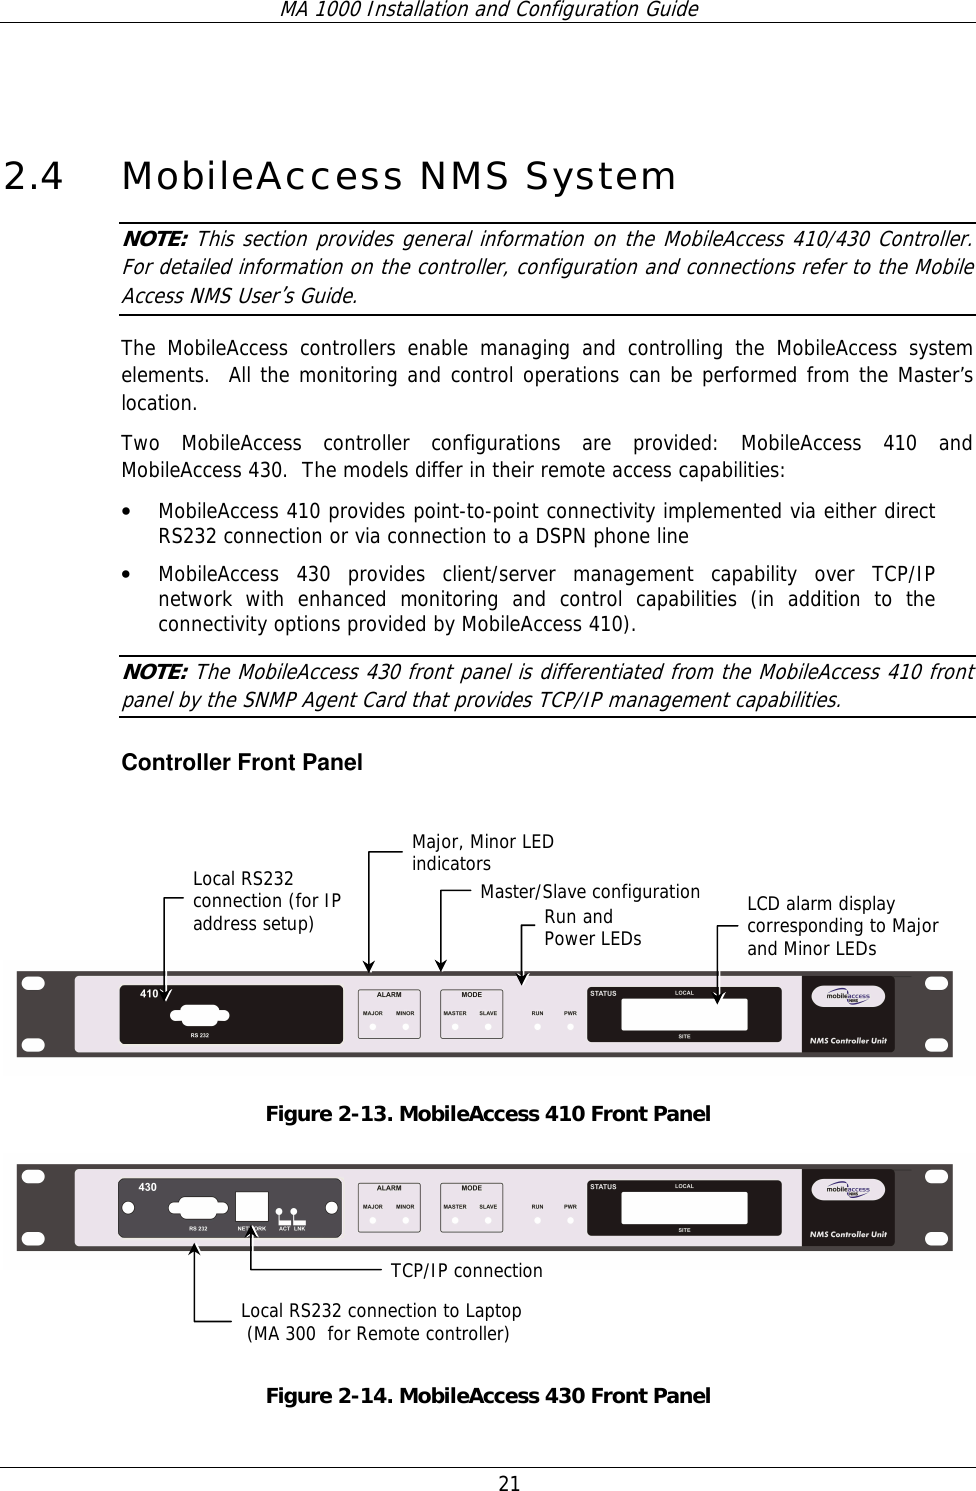 MA 1000 Installation and Configuration Guide  21  2.4 MobileAccess NMS System NOTE: This section provides general information on the MobileAccess 410/430 Controller.  For detailed information on the controller, configuration and connections refer to the Mobile Access NMS User’s Guide. The MobileAccess controllers enable managing and controlling the MobileAccess system elements.  All the monitoring and control operations can be performed from the Master’s location.  Two MobileAccess controller configurations are provided: MobileAccess 410 and MobileAccess 430.  The models differ in their remote access capabilities: • MobileAccess 410 provides point-to-point connectivity implemented via either direct RS232 connection or via connection to a DSPN phone line • MobileAccess 430 provides client/server management capability over TCP/IP network with enhanced monitoring and control capabilities (in addition to the connectivity options provided by MobileAccess 410).   NOTE: The MobileAccess 430 front panel is differentiated from the MobileAccess 410 front panel by the SNMP Agent Card that provides TCP/IP management capabilities.   Controller Front Panel      Figure  2-13. MobileAccess 410 Front Panel    Figure  2-14. MobileAccess 430 Front Panel Local RS232 connection (for IP address setup) LCD alarm display corresponding to Major and Minor LEDs  Major, Minor LED indicators Master/Slave configurationRun and  Power LEDs TCP/IP connectionLocal RS232 connection to Laptop  (MA 300  for Remote controller) 